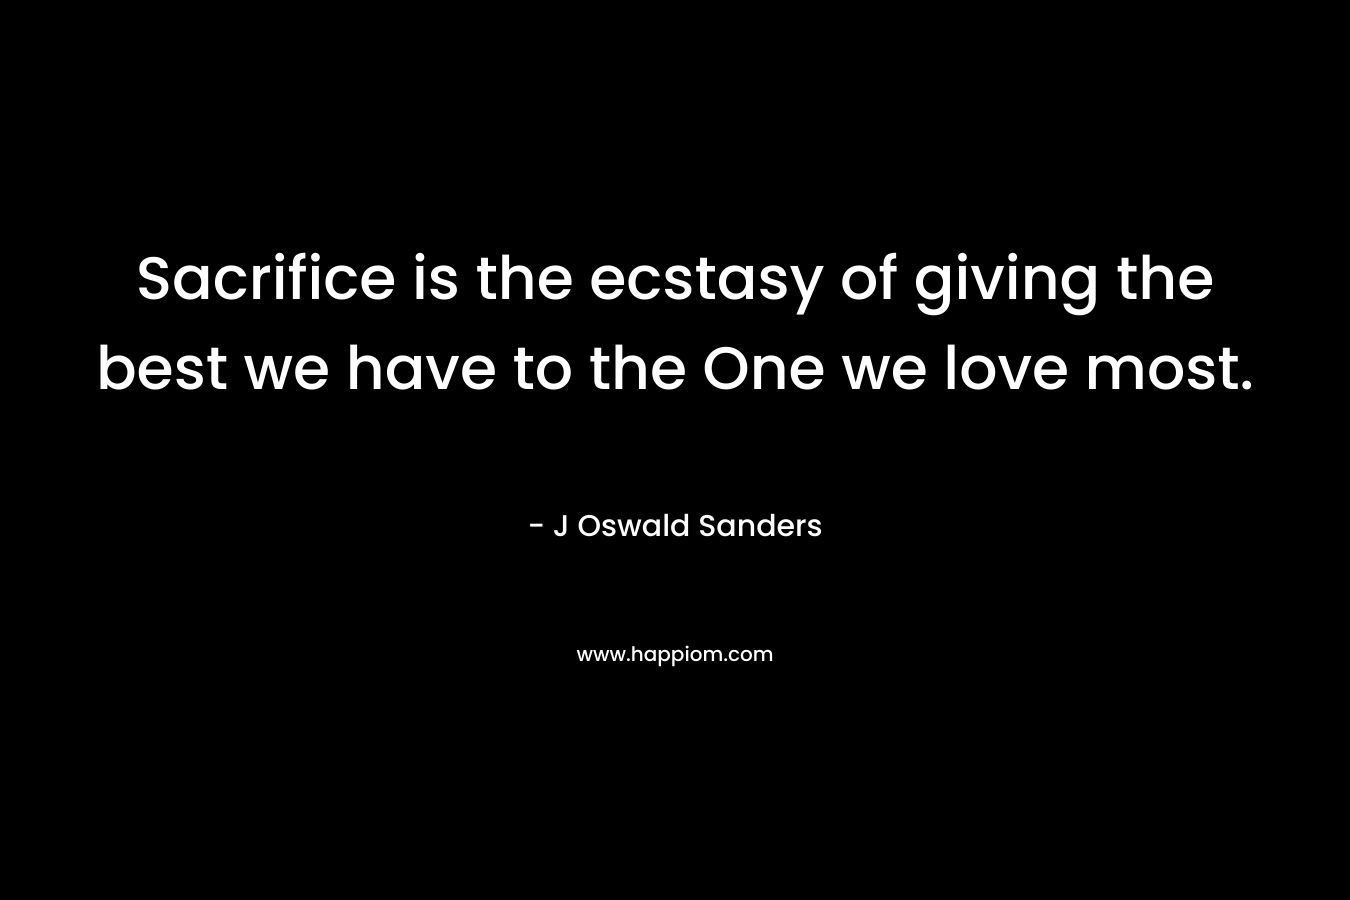 Sacrifice is the ecstasy of giving the best we have to the One we love most. – J Oswald Sanders